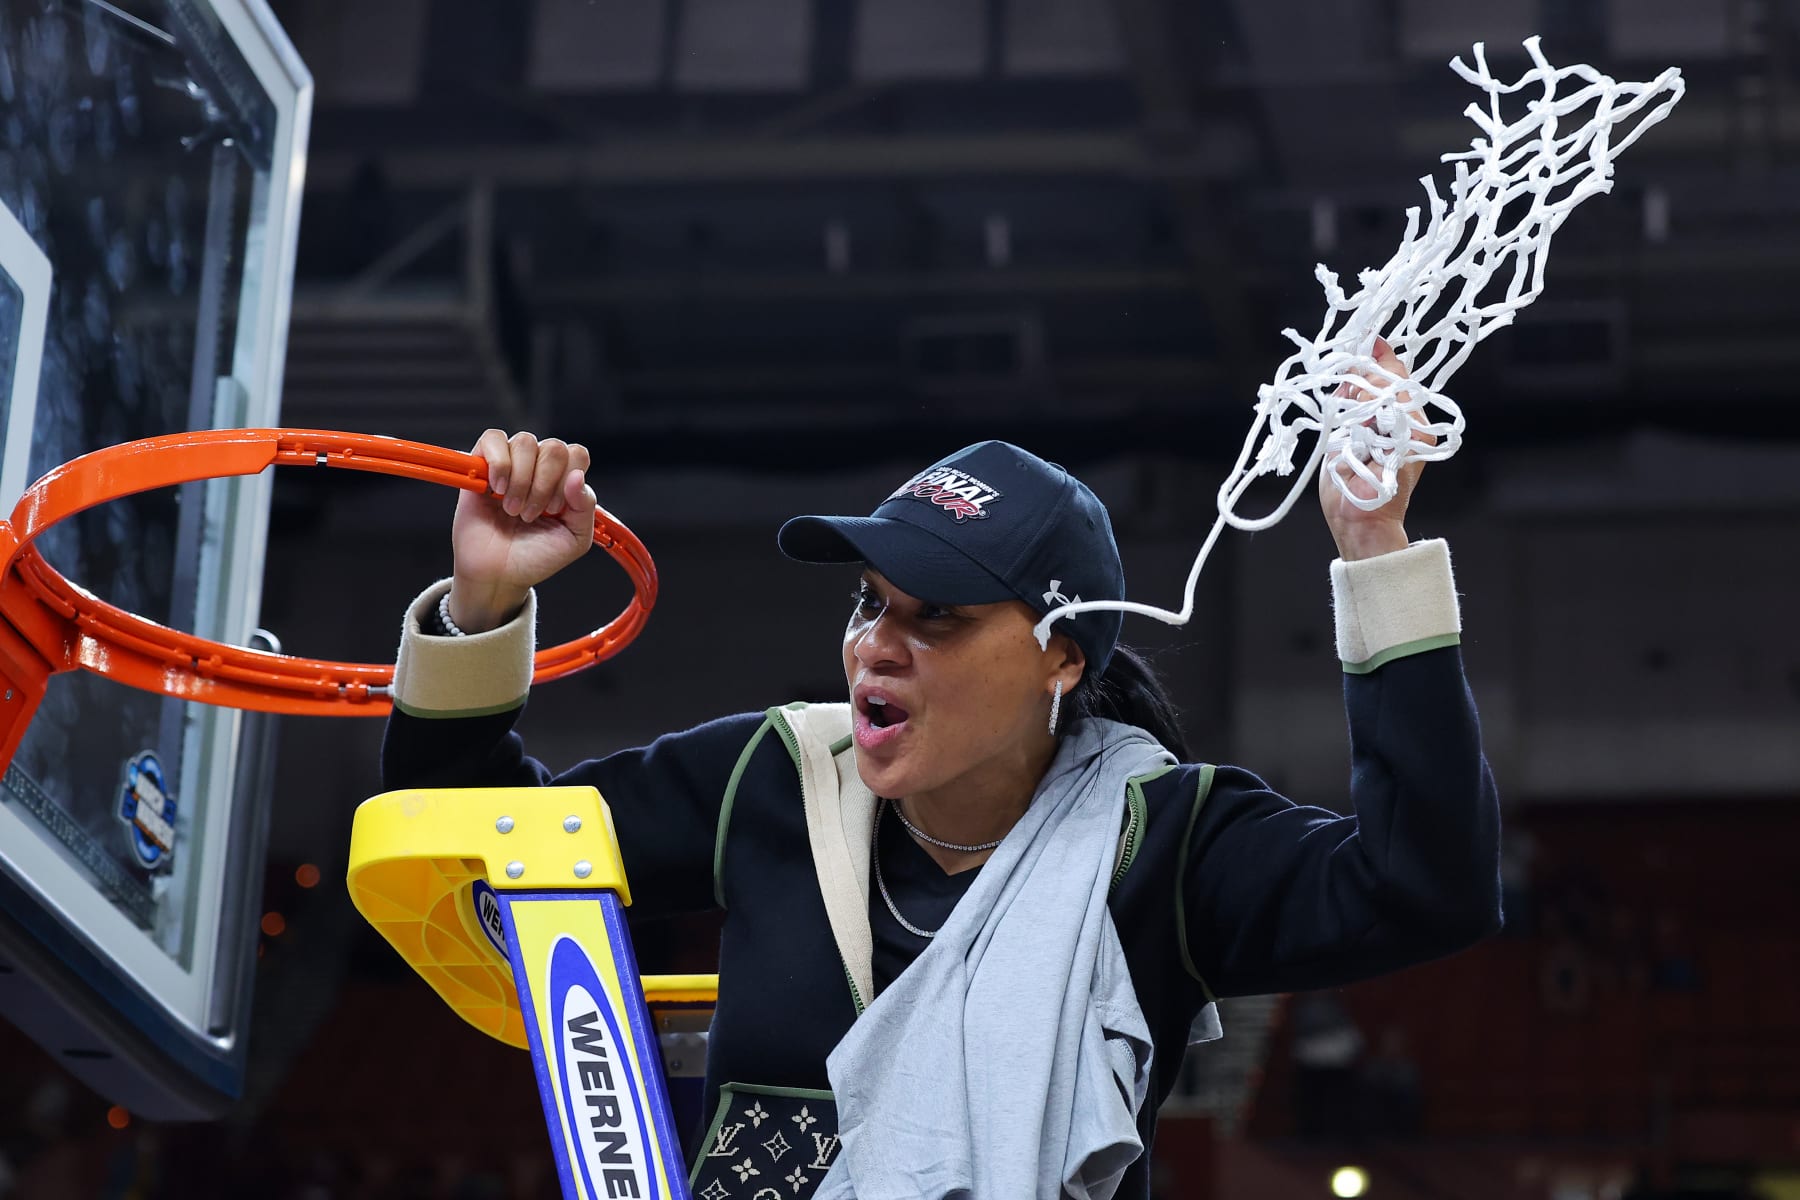 Dawn Staley named Naismith women's coach of the year - Sports Illustrated